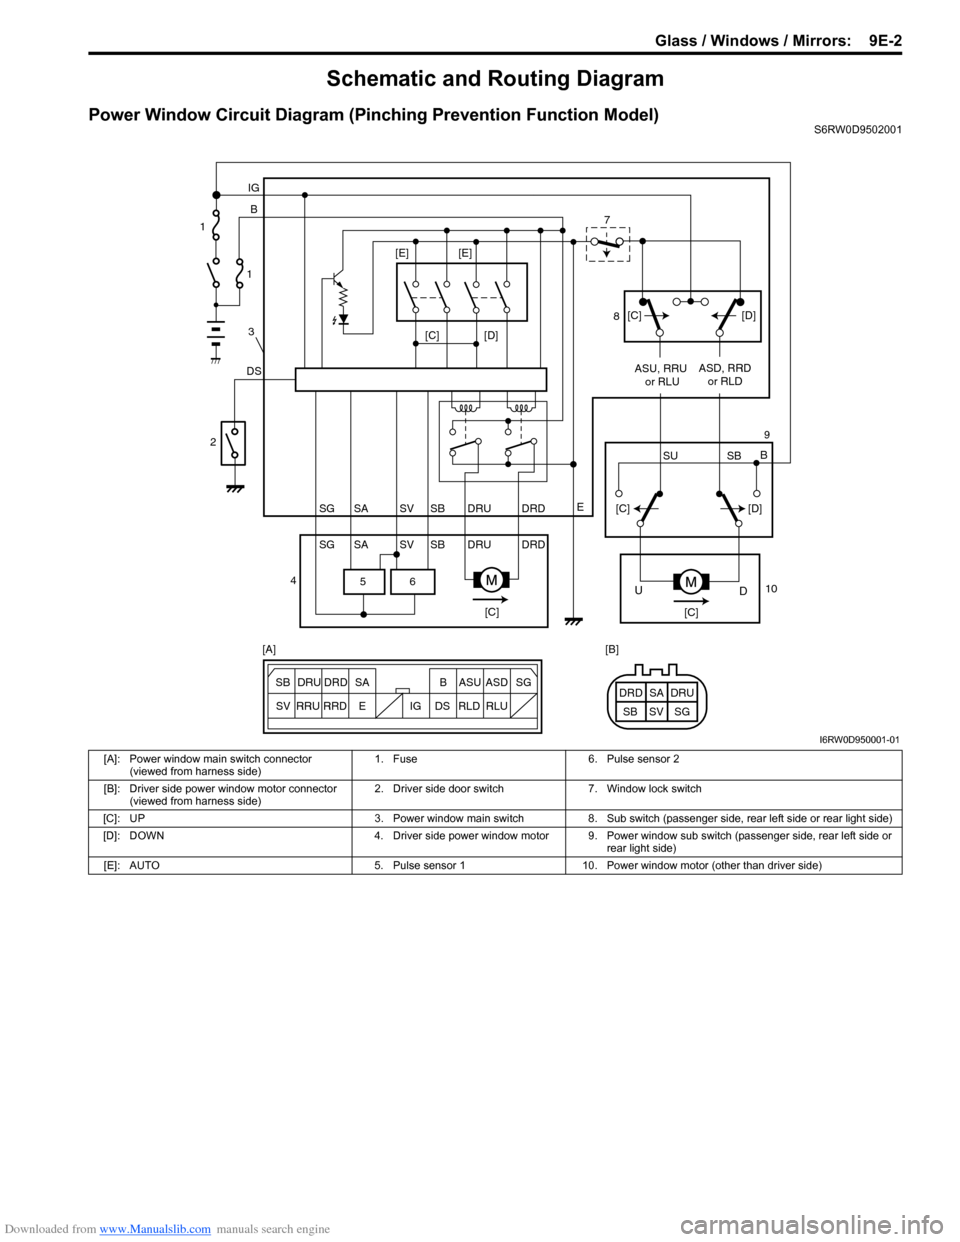 SUZUKI SX4 2006 1.G Service Workshop Manual Downloaded from www.Manualslib.com manuals search engine Glass / Windows / Mirrors:  9E-2
Schematic and Routing Diagram
Power Window Circuit Diagram (Pinching Prevention Function Model)S6RW0D9502001
6